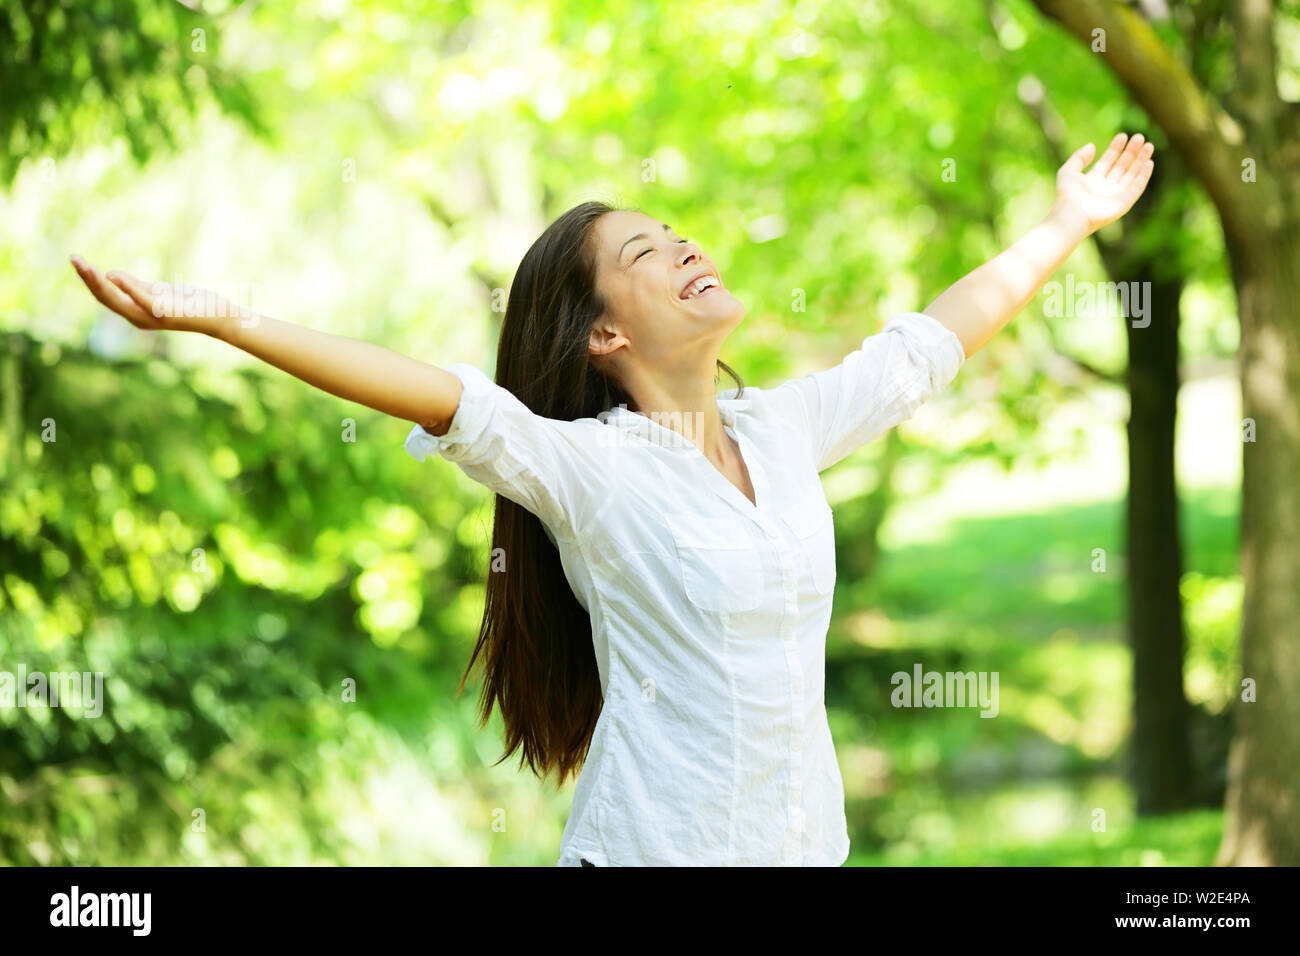 Young woman meditating with open arms standing in fresh spring greenery with her head raised to the sky and her eyes closed rejoicing in the freshness and new beginnings of spring and nature Stock Photo